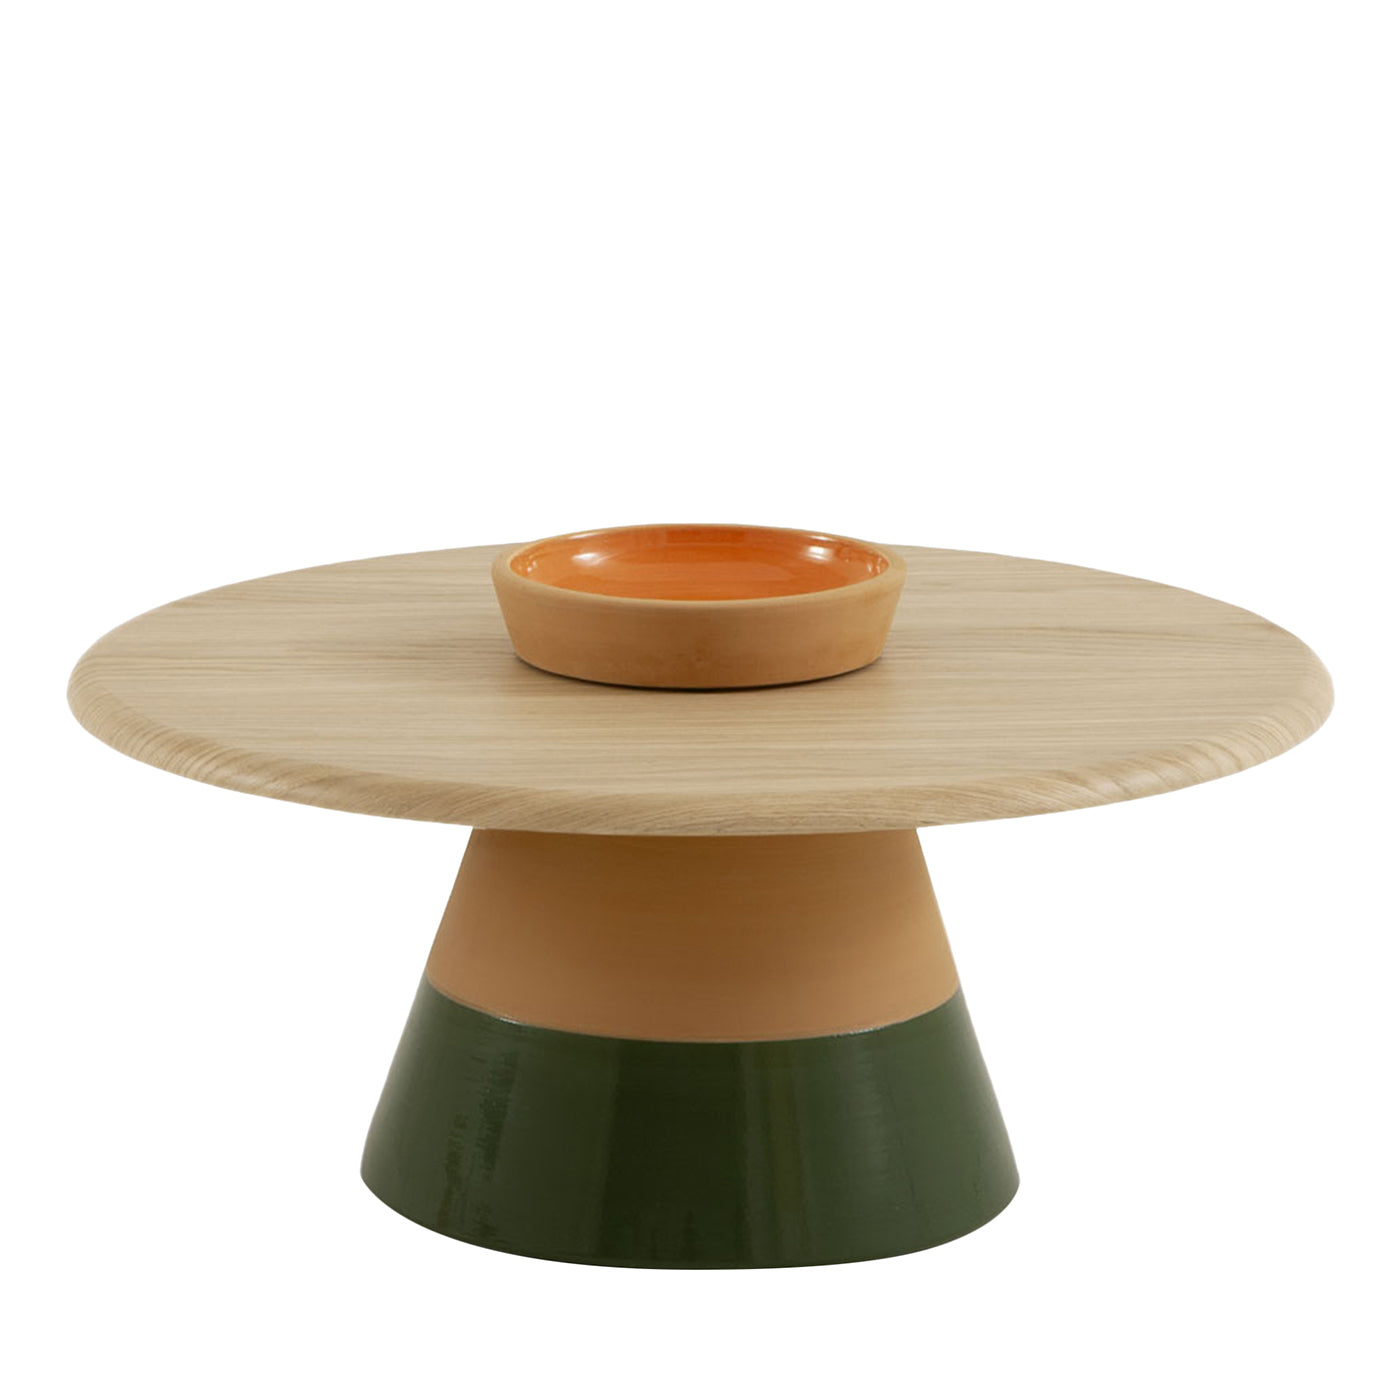 Sablier Small Table with Clay Base & Oak Wood Top - Main view